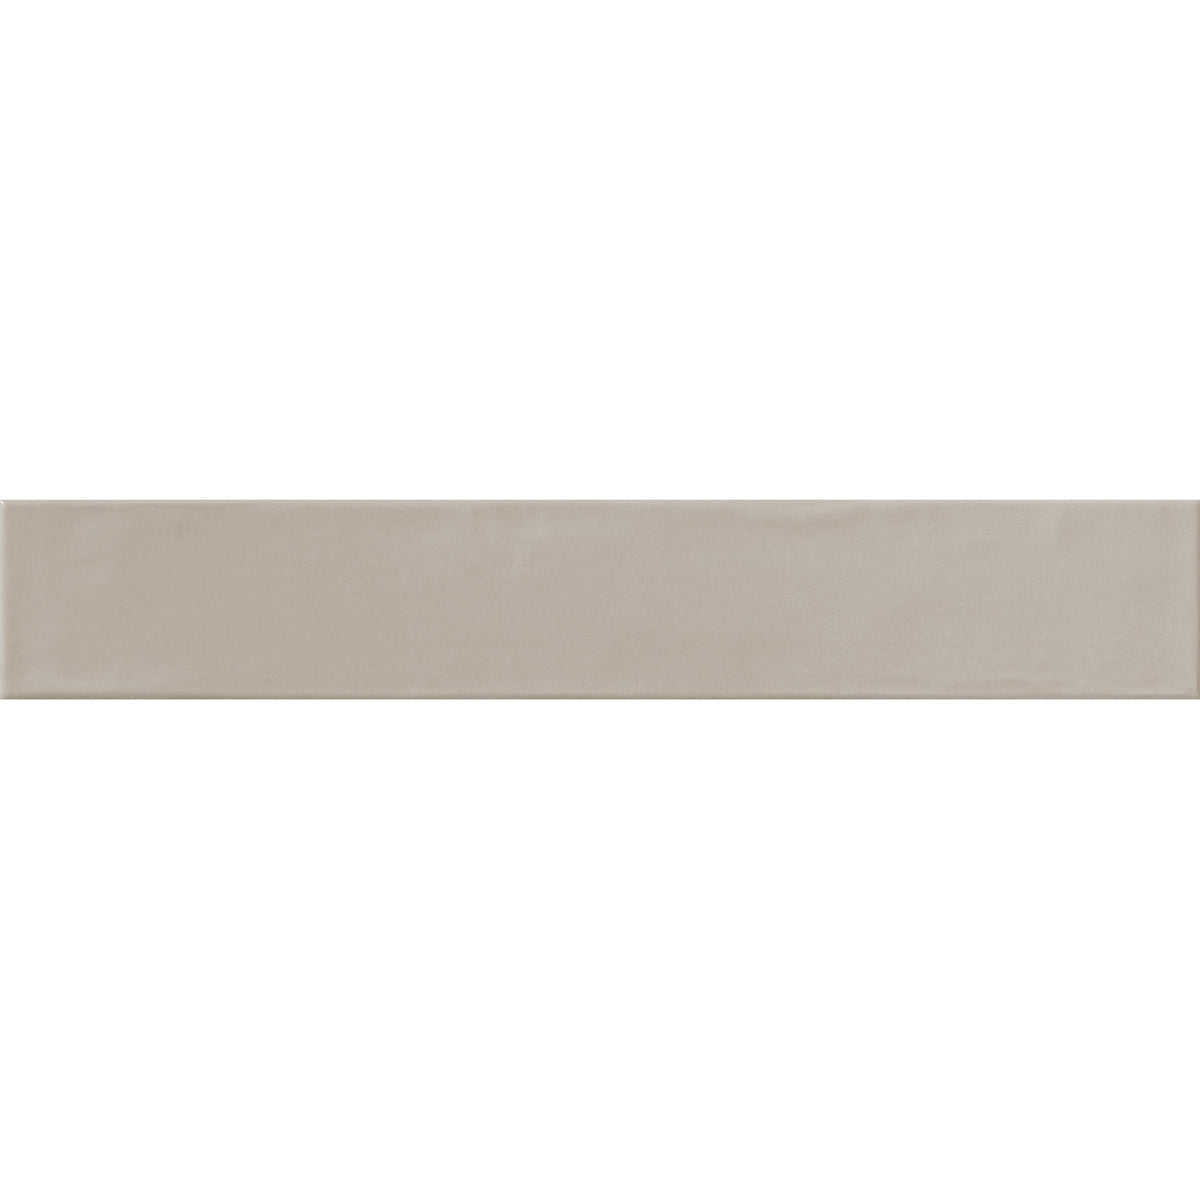 Arizona Tile - Smooth 4&quot; x 24&quot; Ceramic Wall Tile - Sand